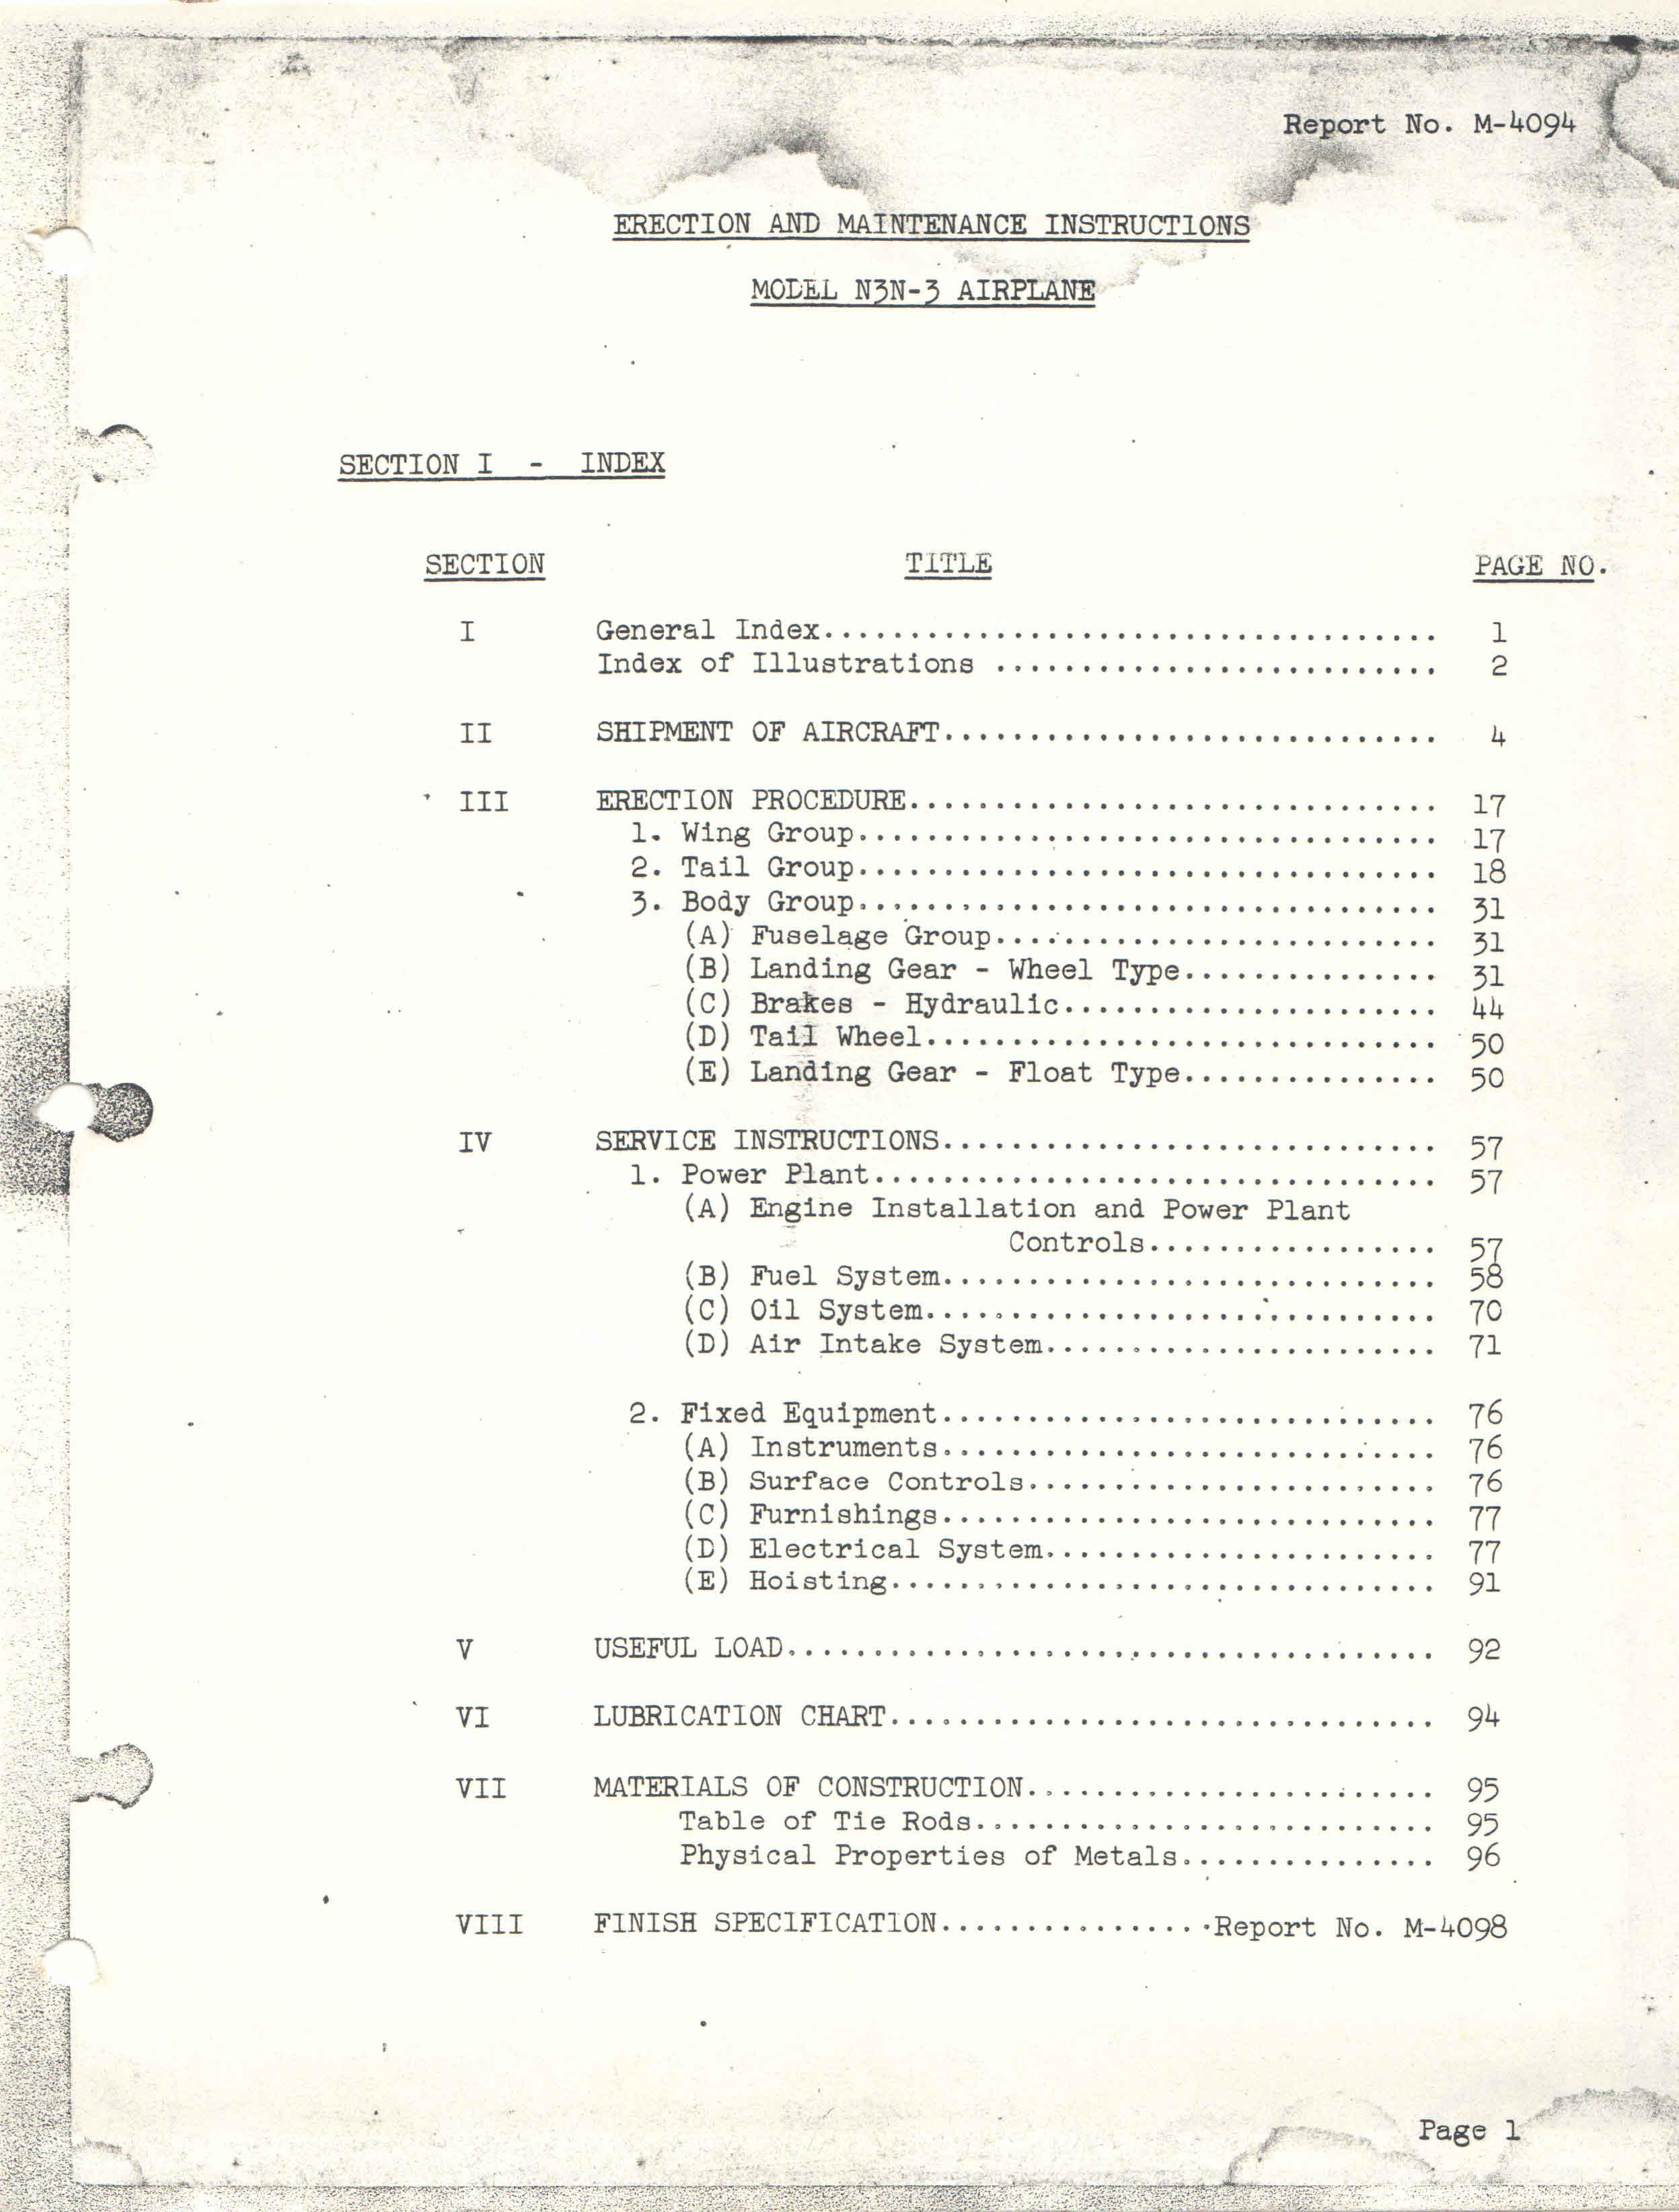 Sample page 2 from AirCorps Library document: Erection and Maintenance for Model N3N-3